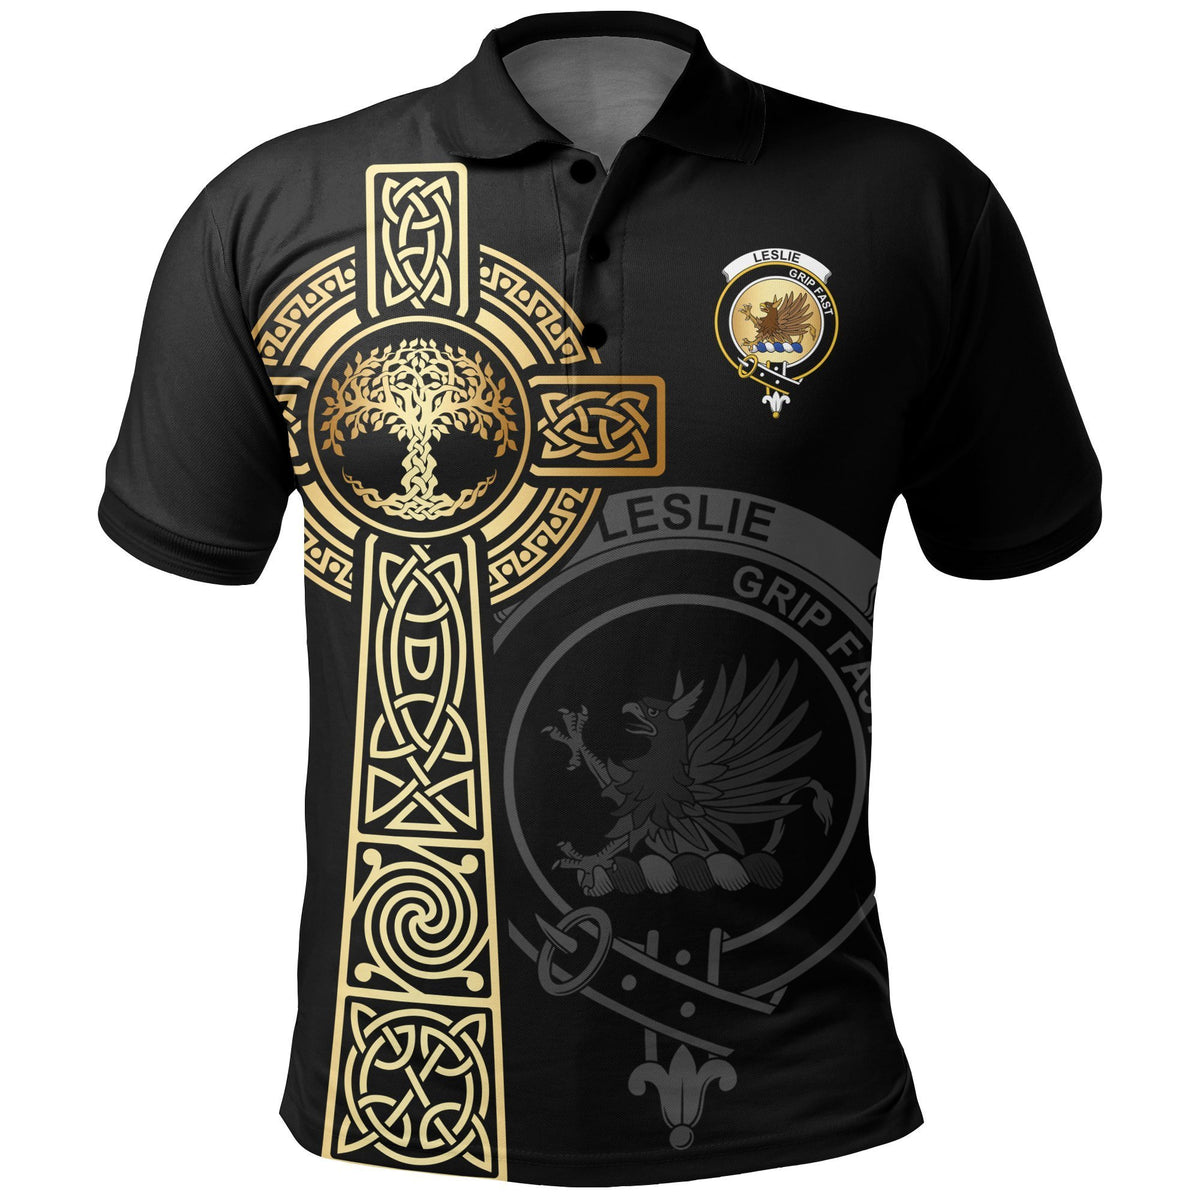 Leslie (Earl of Rothes) Clan Unisex Polo Shirt - Celtic Tree Of Life